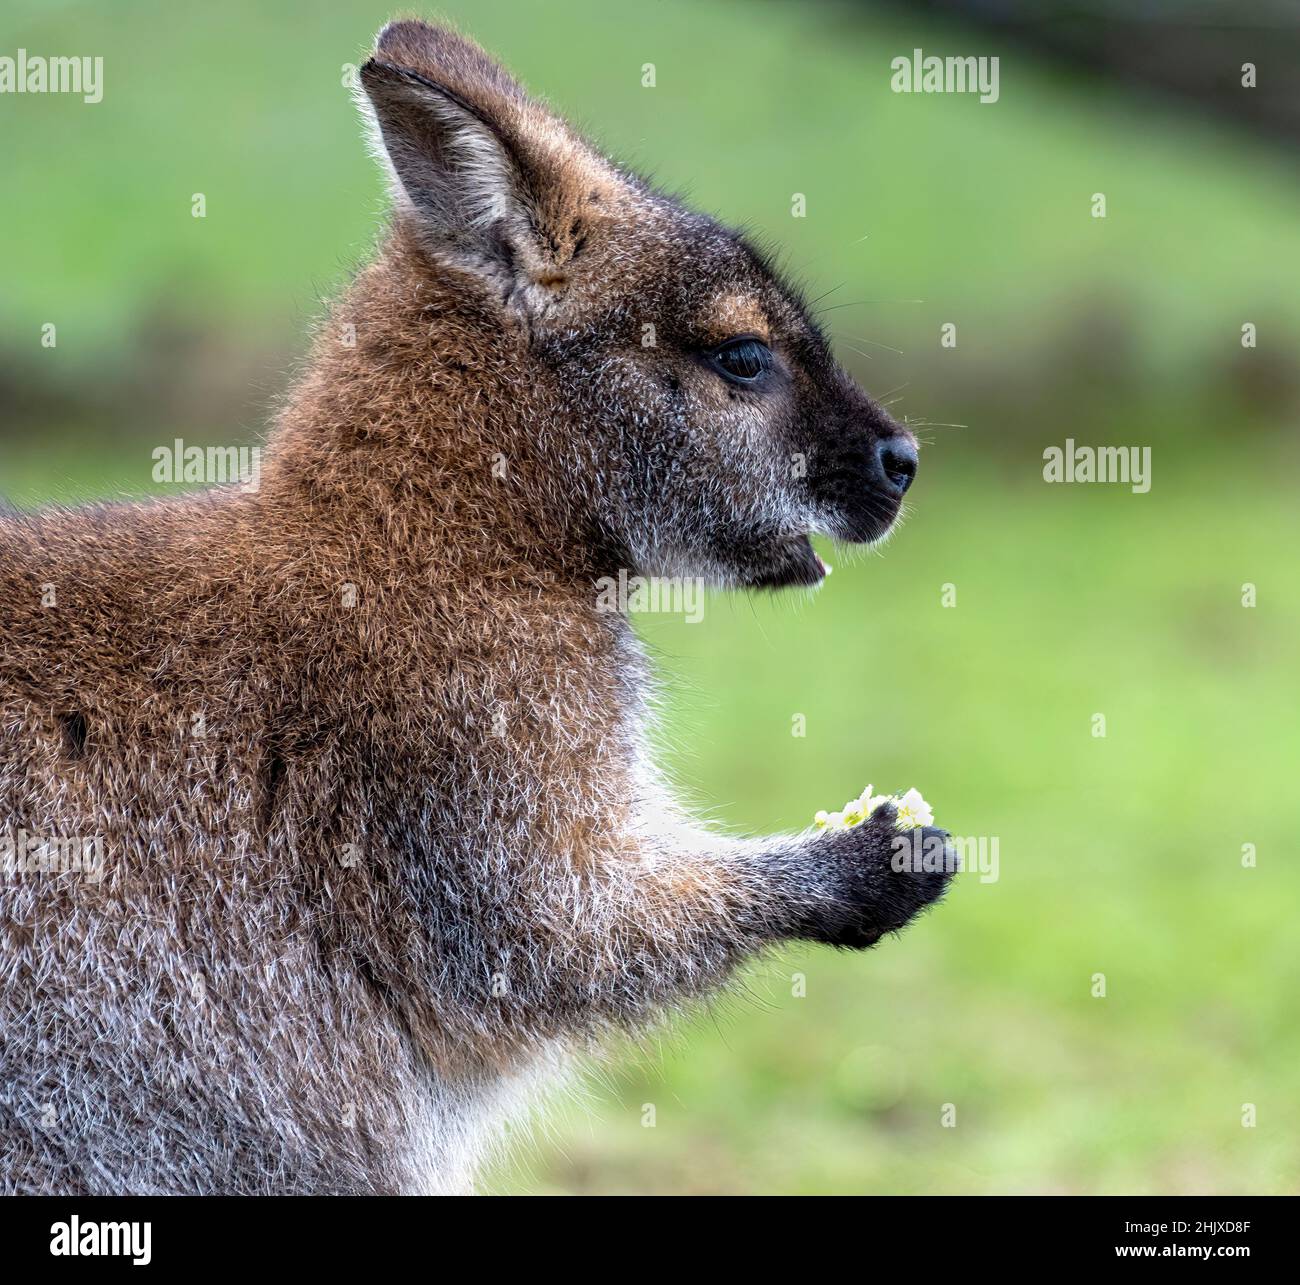 Bennett's Wallaby or Red-necked Wallaby portrait Stock Photo